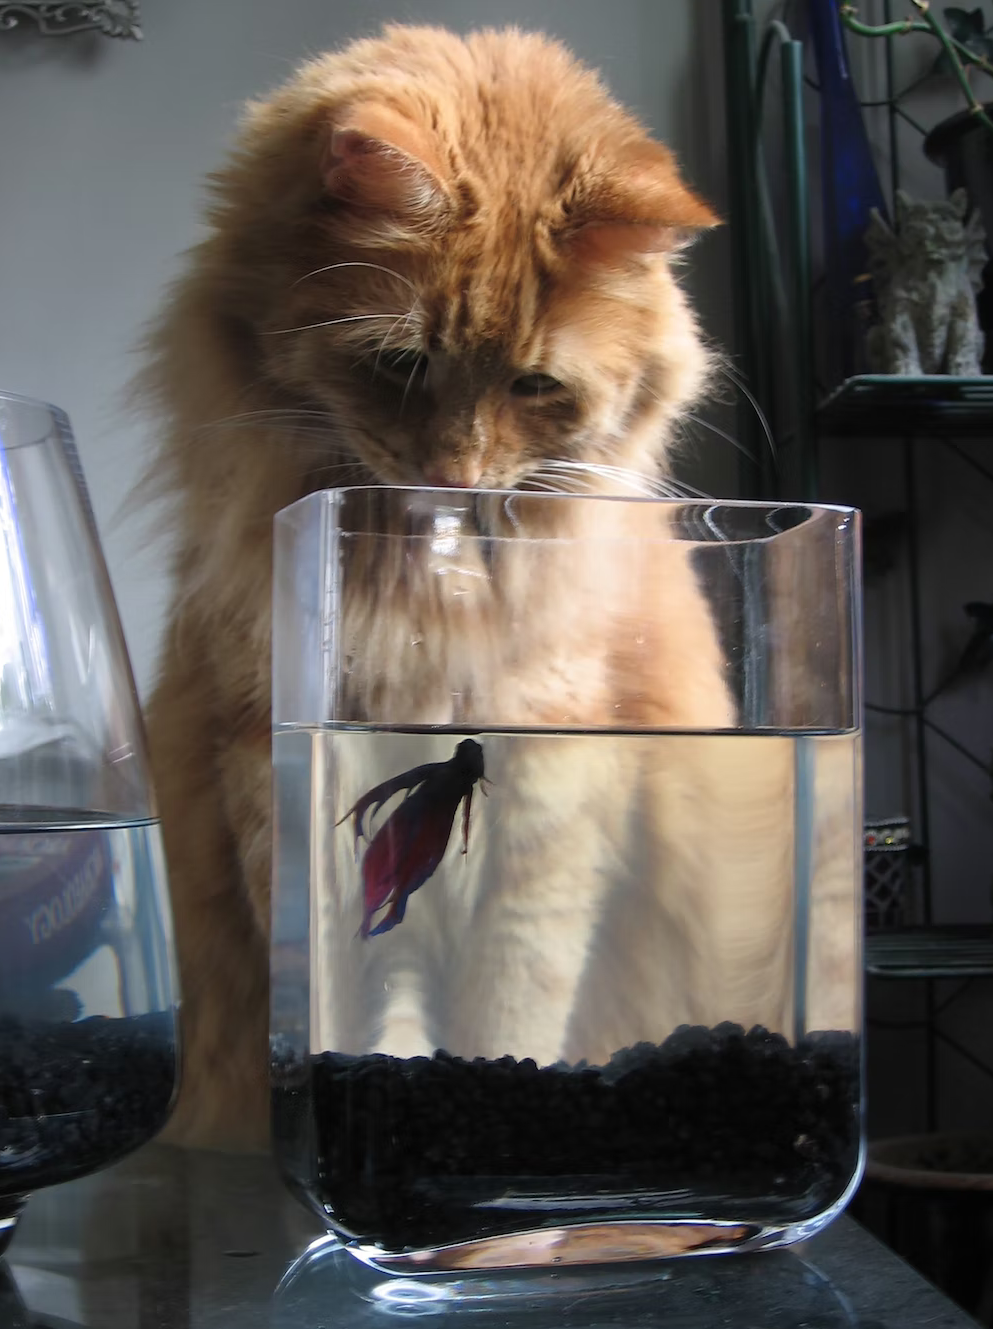 A photo of a cat looking at a fish swimming in a bowl (Daniel Tuttle, presumably human, via Unsplash)